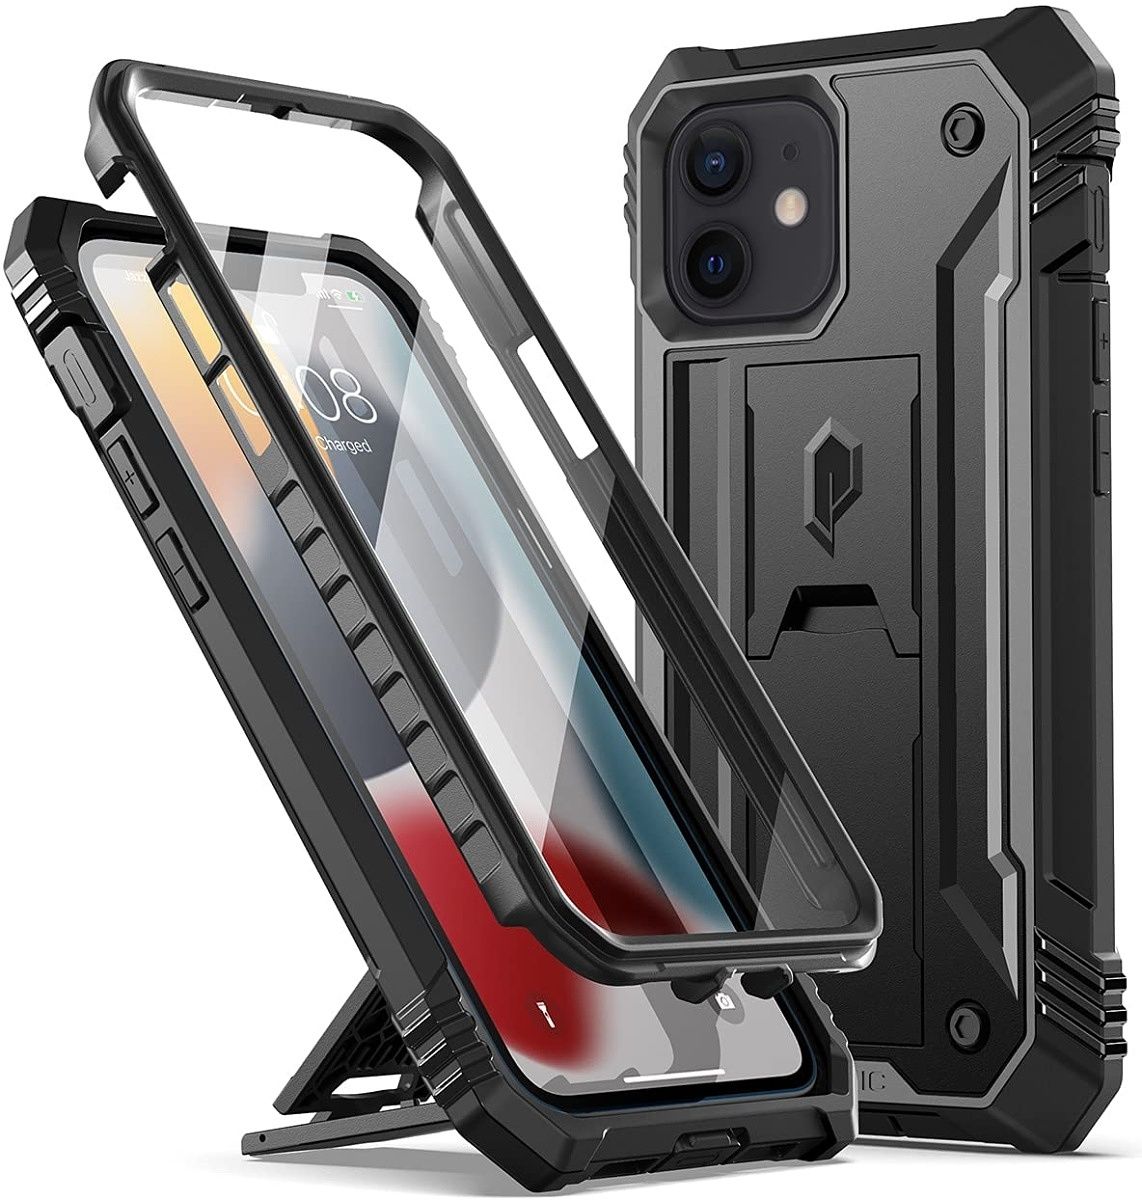 Here's a rugged case with ultimate protection for the phone that also has a kickstand built right onto the back.